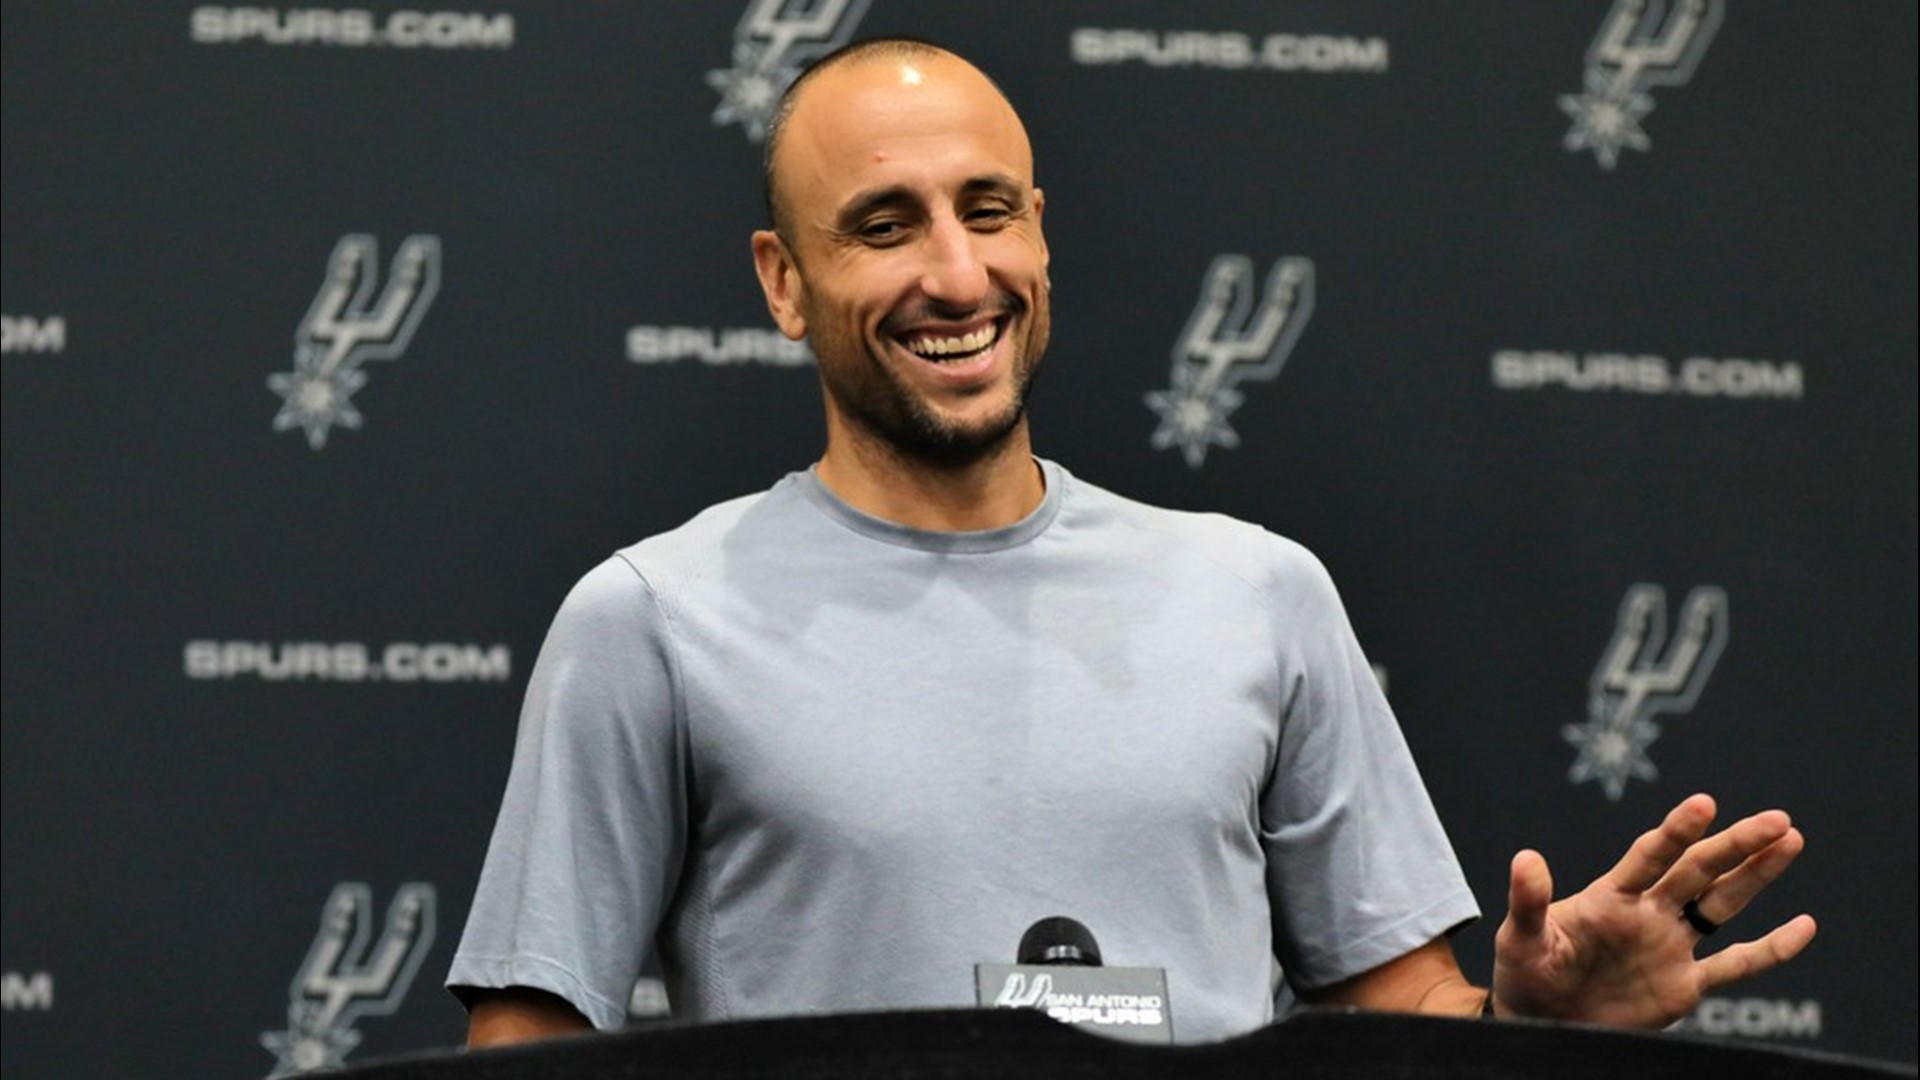 Manu Ginobili is set to rejoin the team as a special advisor to basketball operations, focusing on player development.